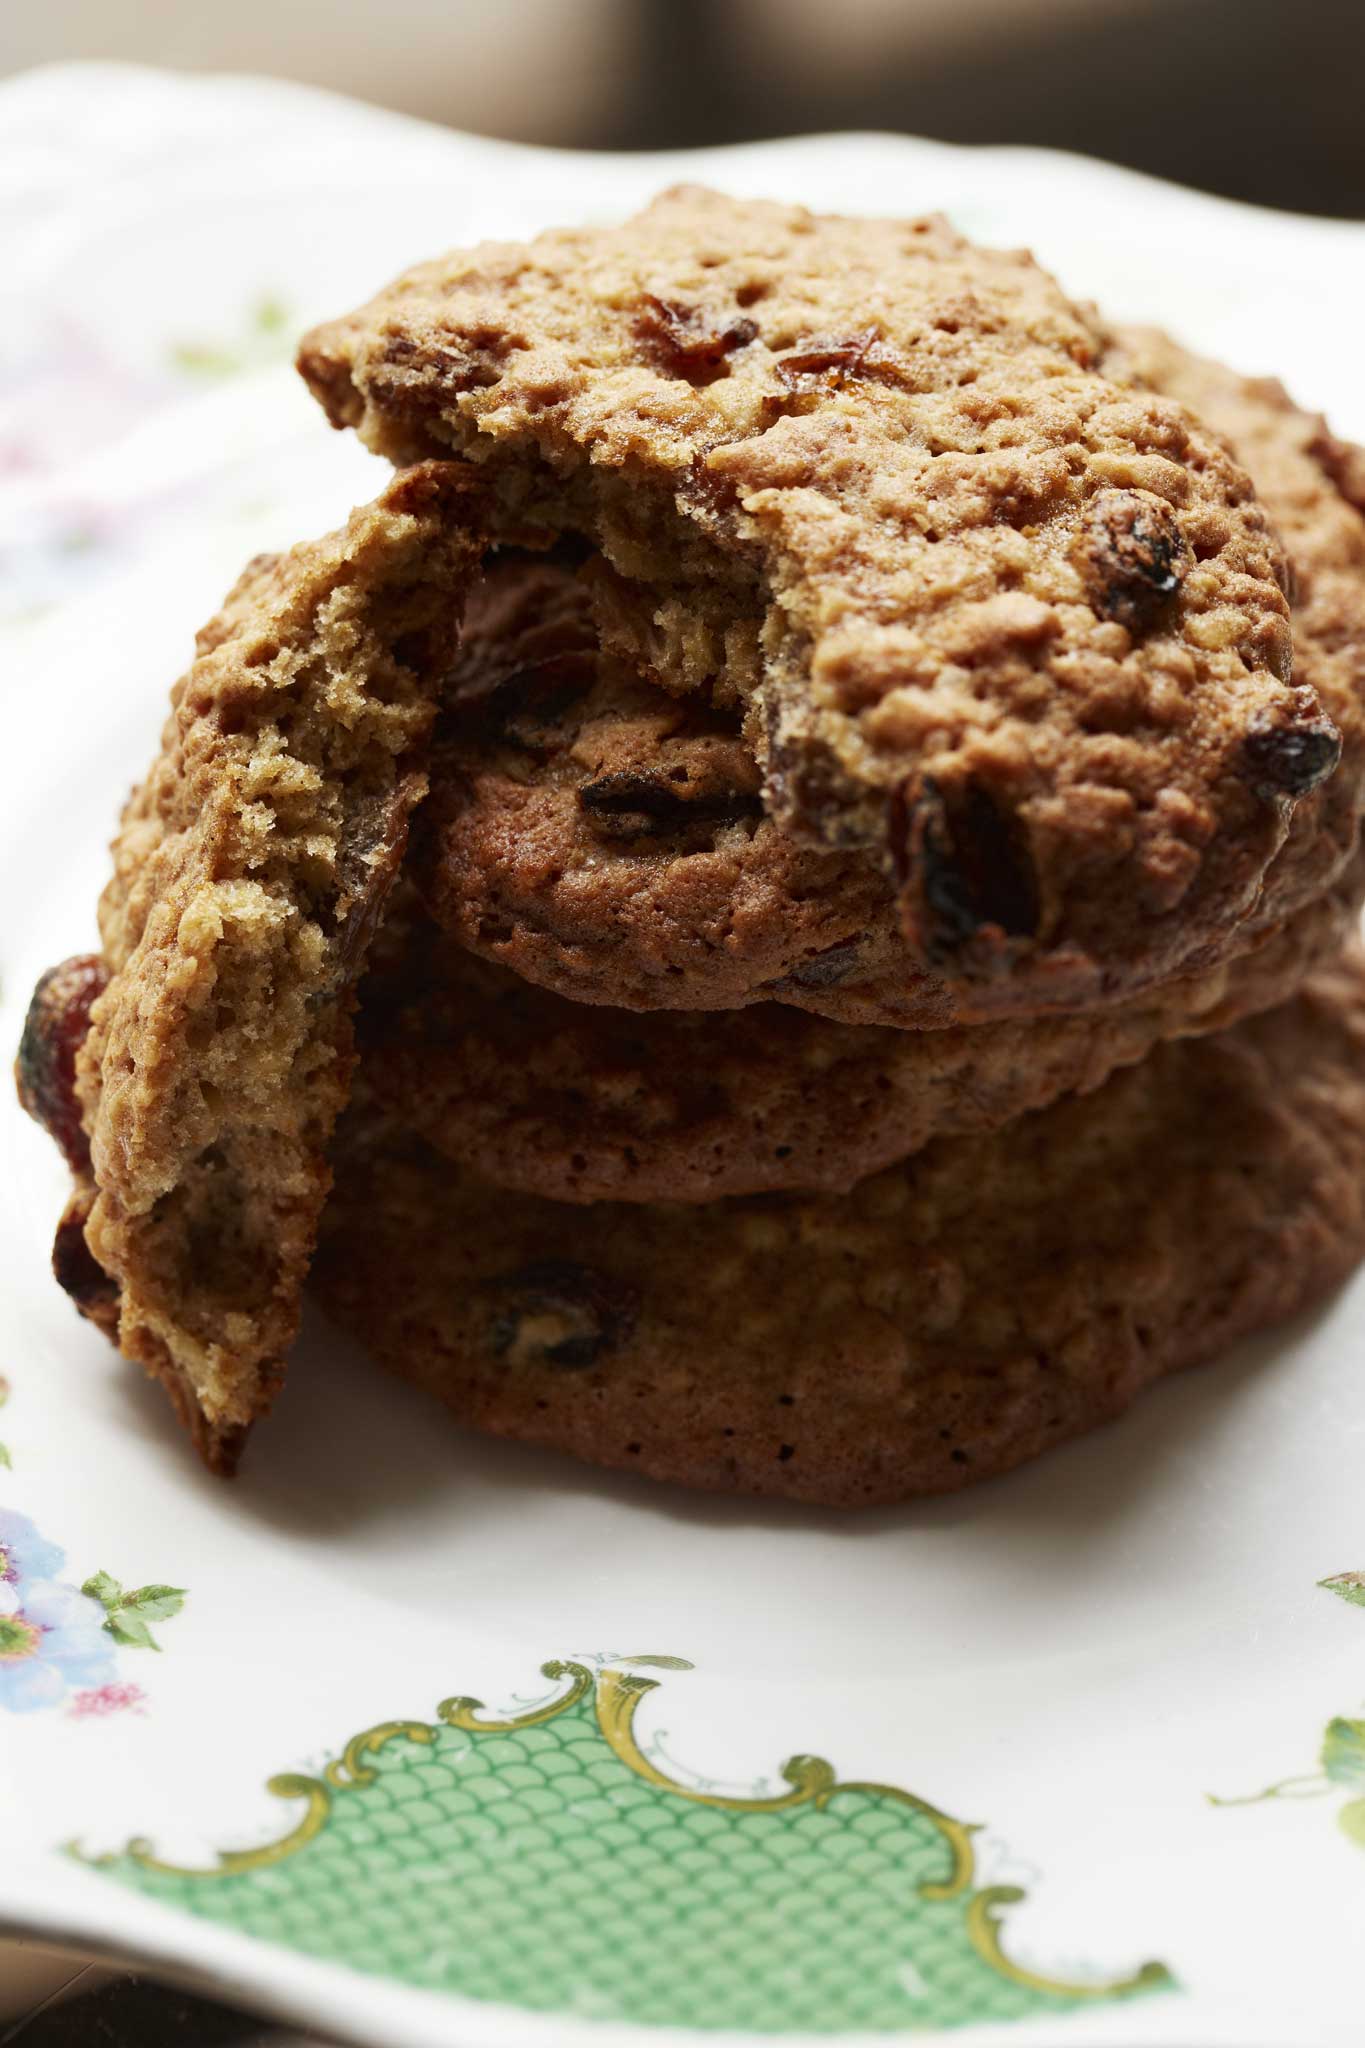 April Bloomfield's soft oatmeal cookies